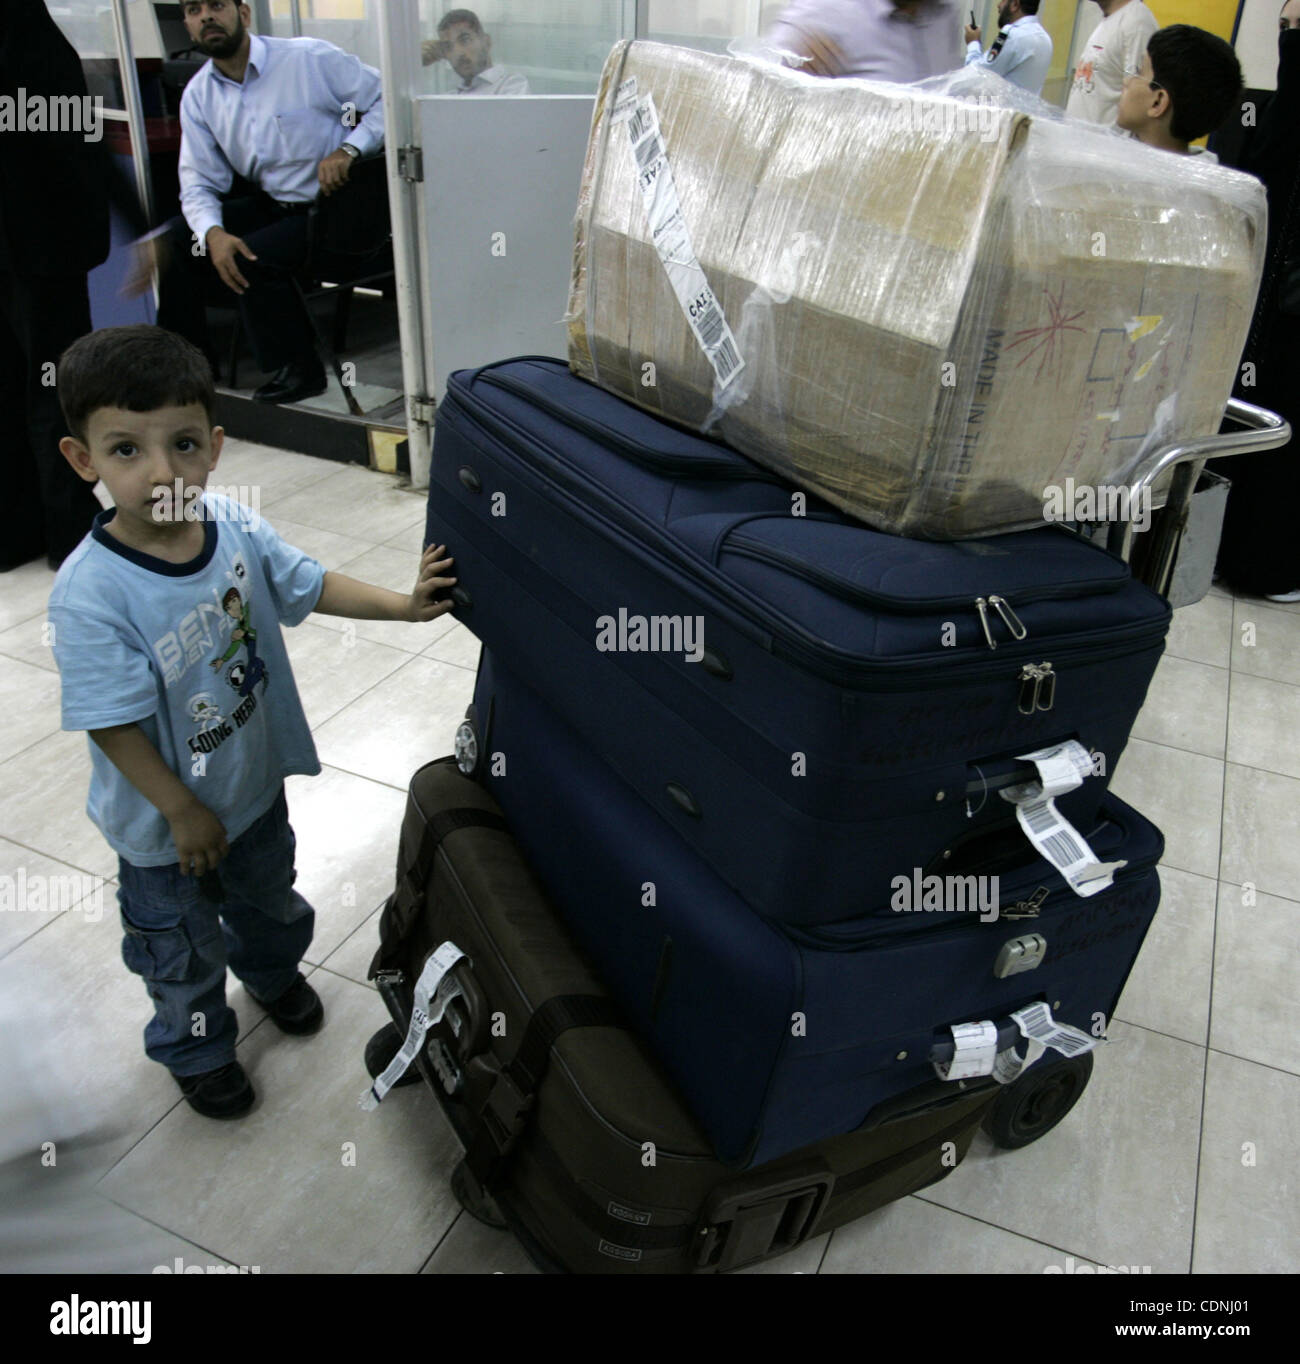 A Palestinian boy with his family during loading their luggage coming from Egypt through the Rafah border crossing in the southern Gaza Strip on on June 13, 2011. Photo by Abed Rahim Khatib Stock Photo